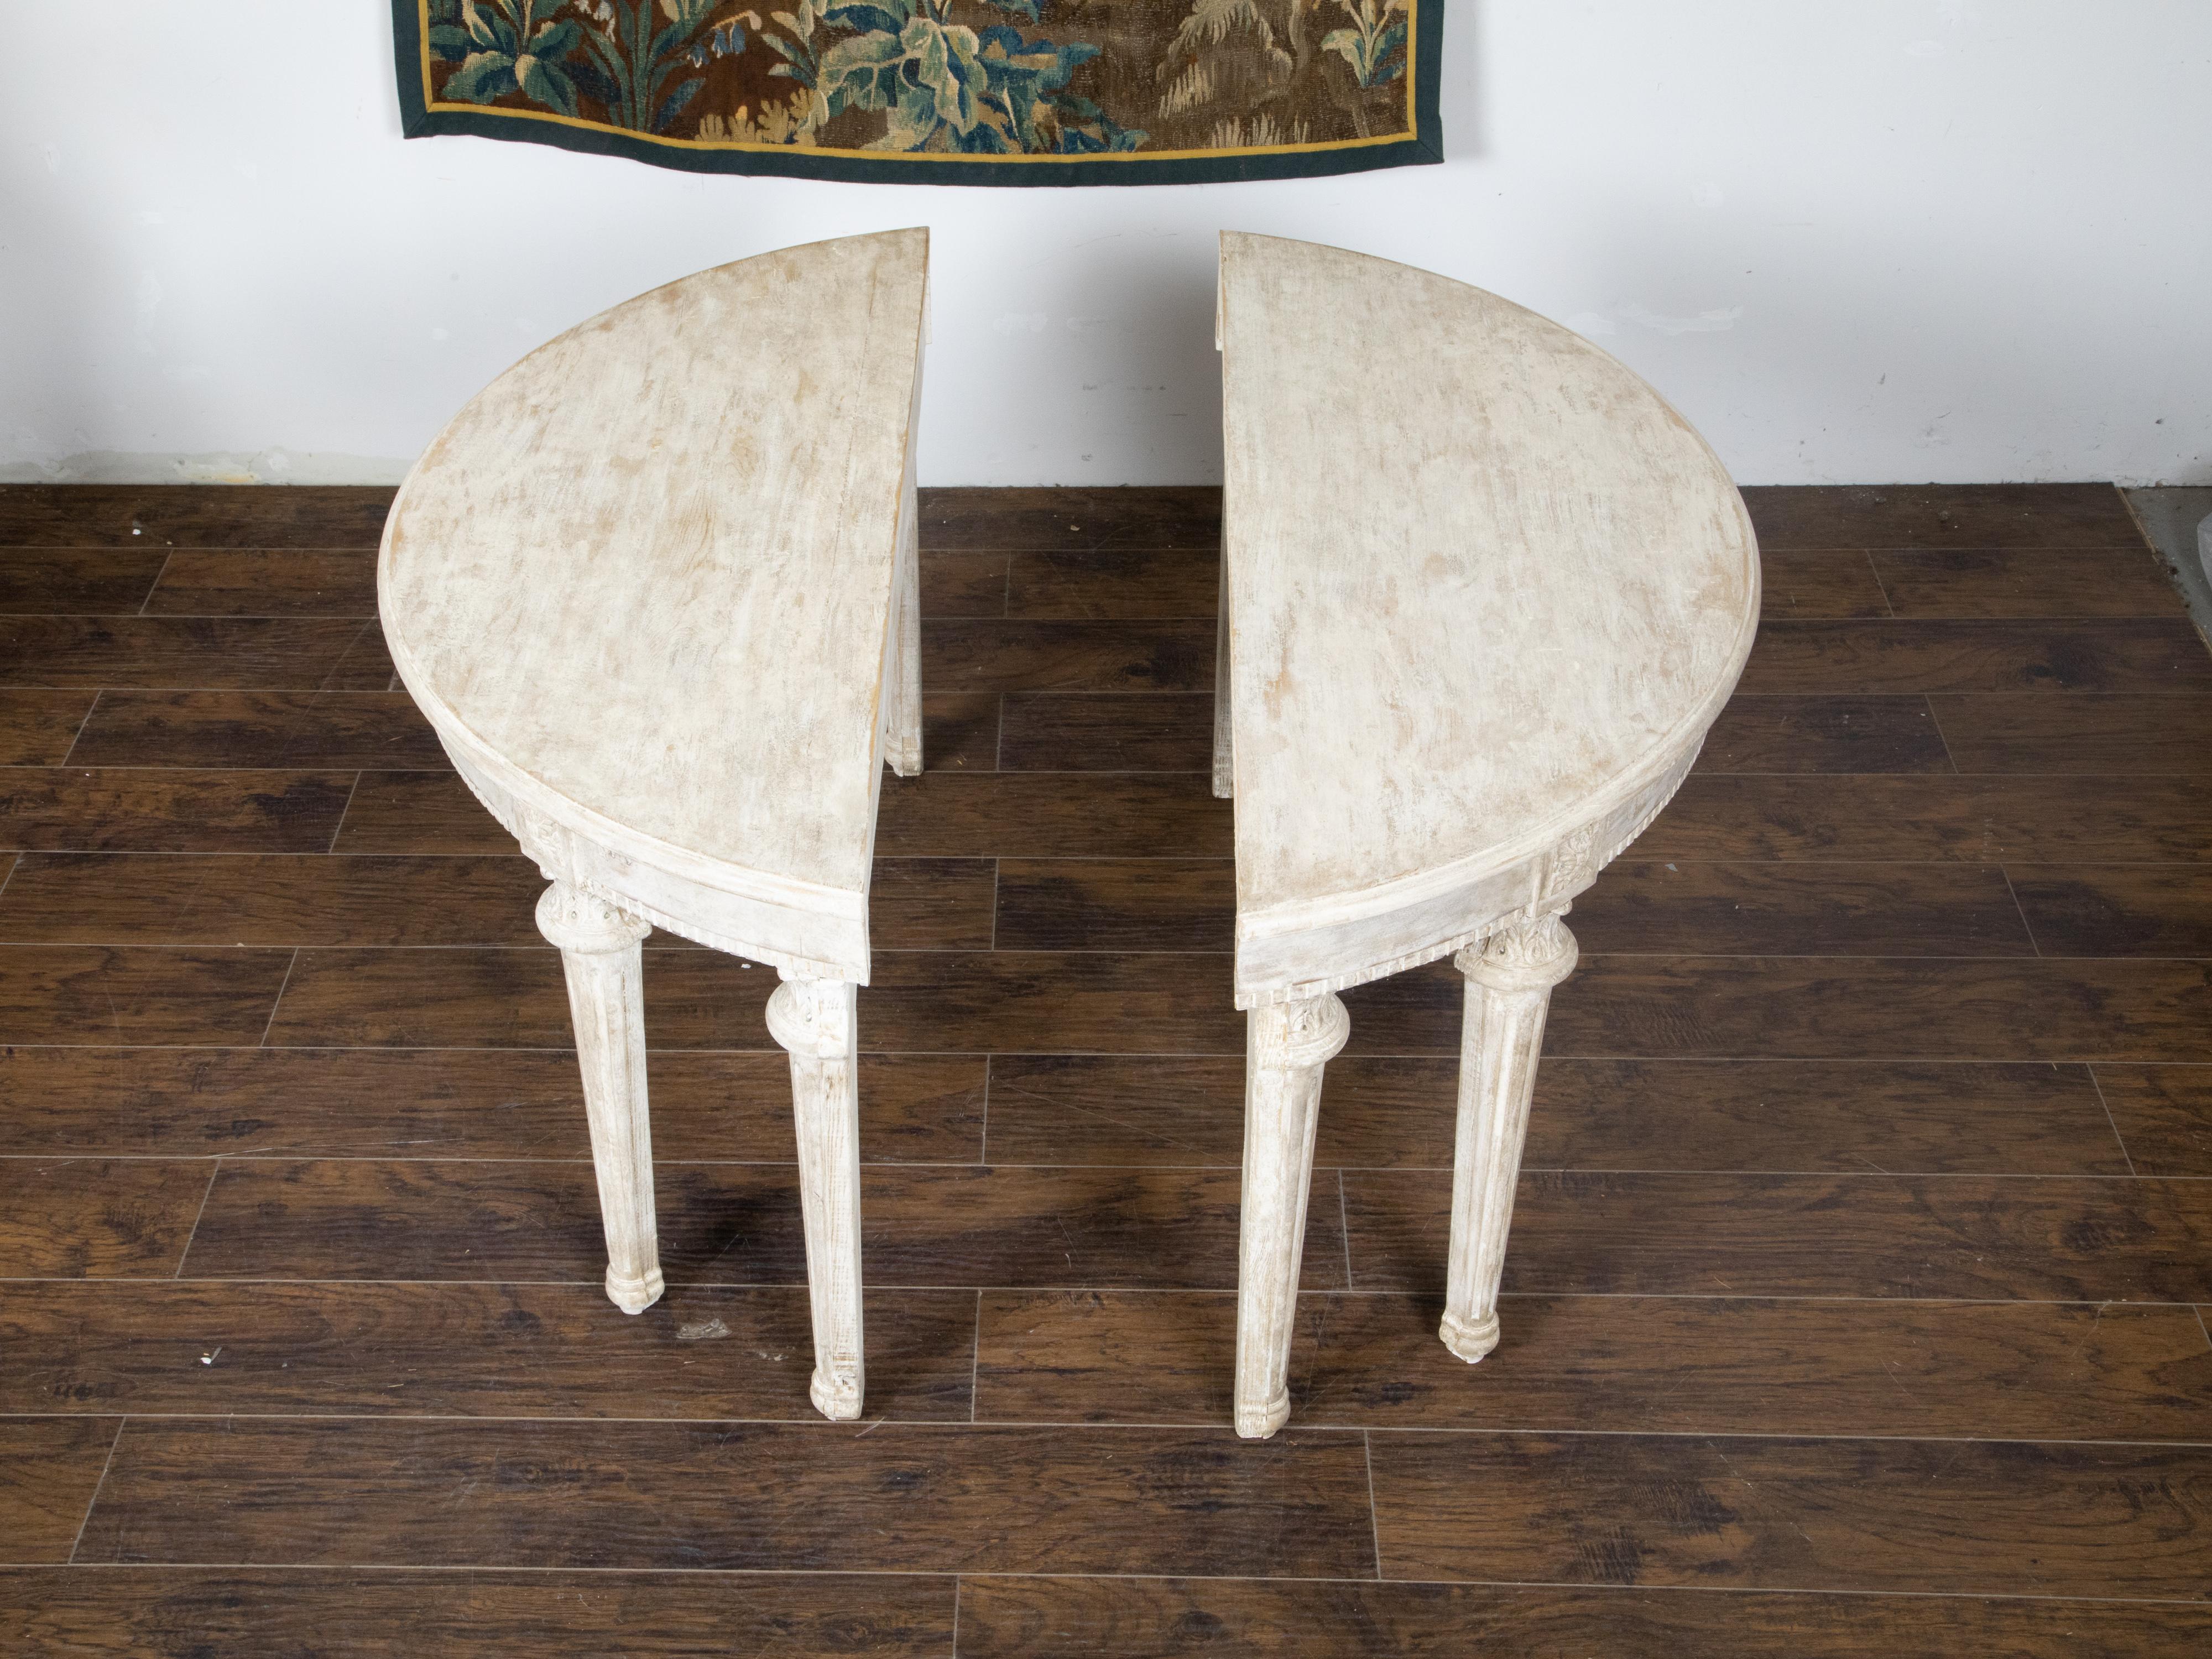 Pair of French Neoclassical Style 1880s Demilune Tables with Carved Décor For Sale 3